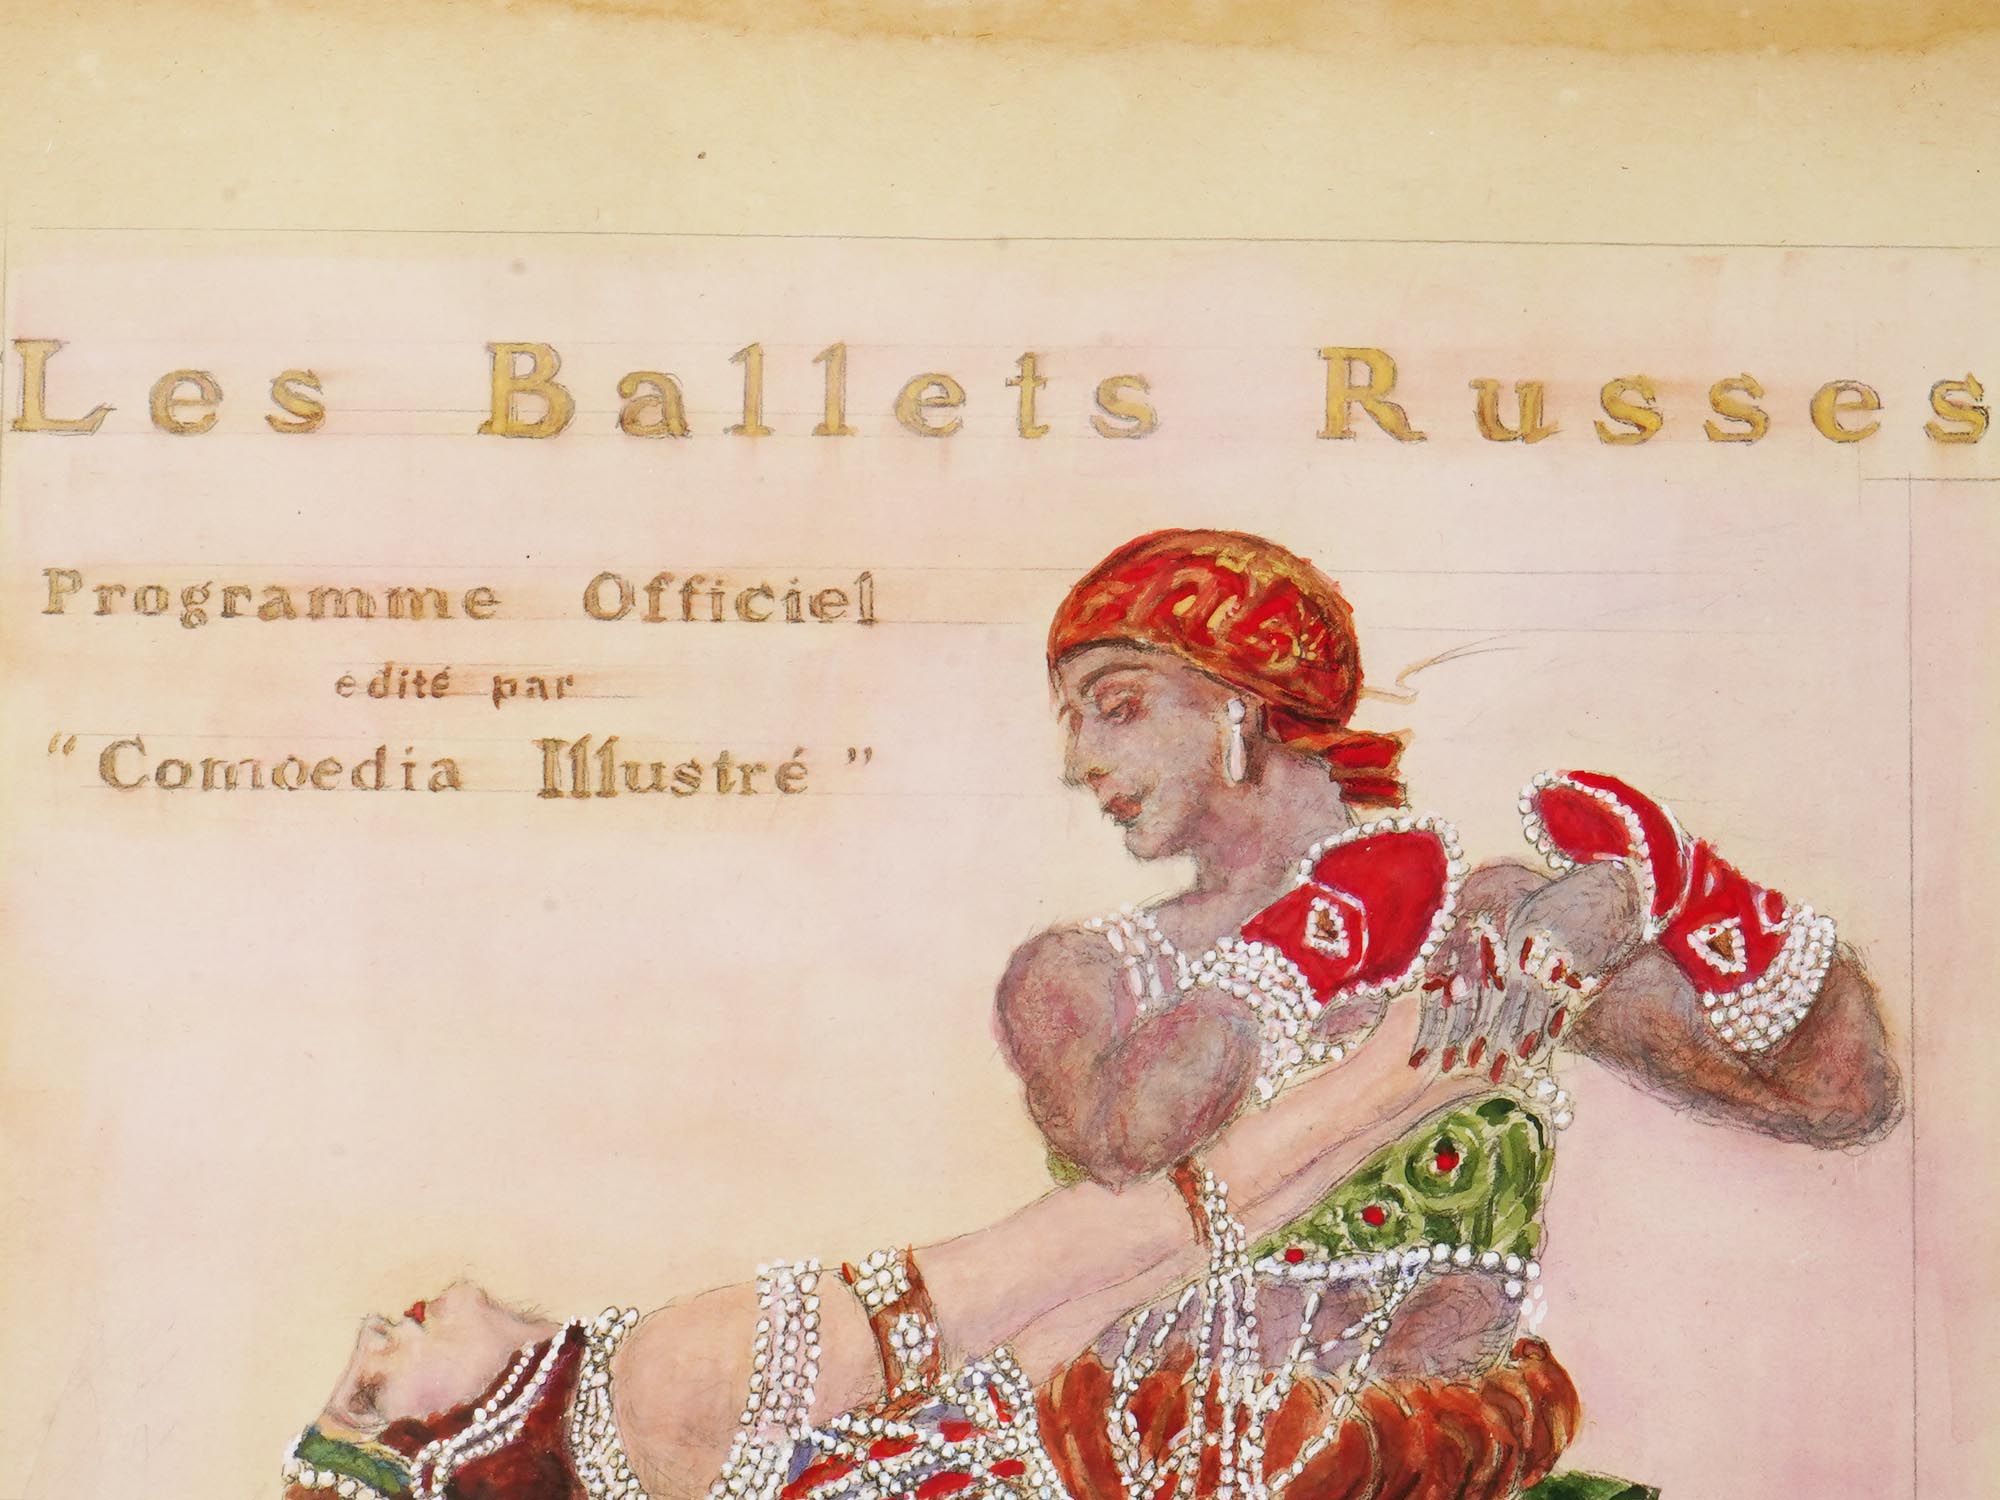 RUSSIAN BALLET WATERCOLOR PAINTING BY LEON BAKST PIC-2